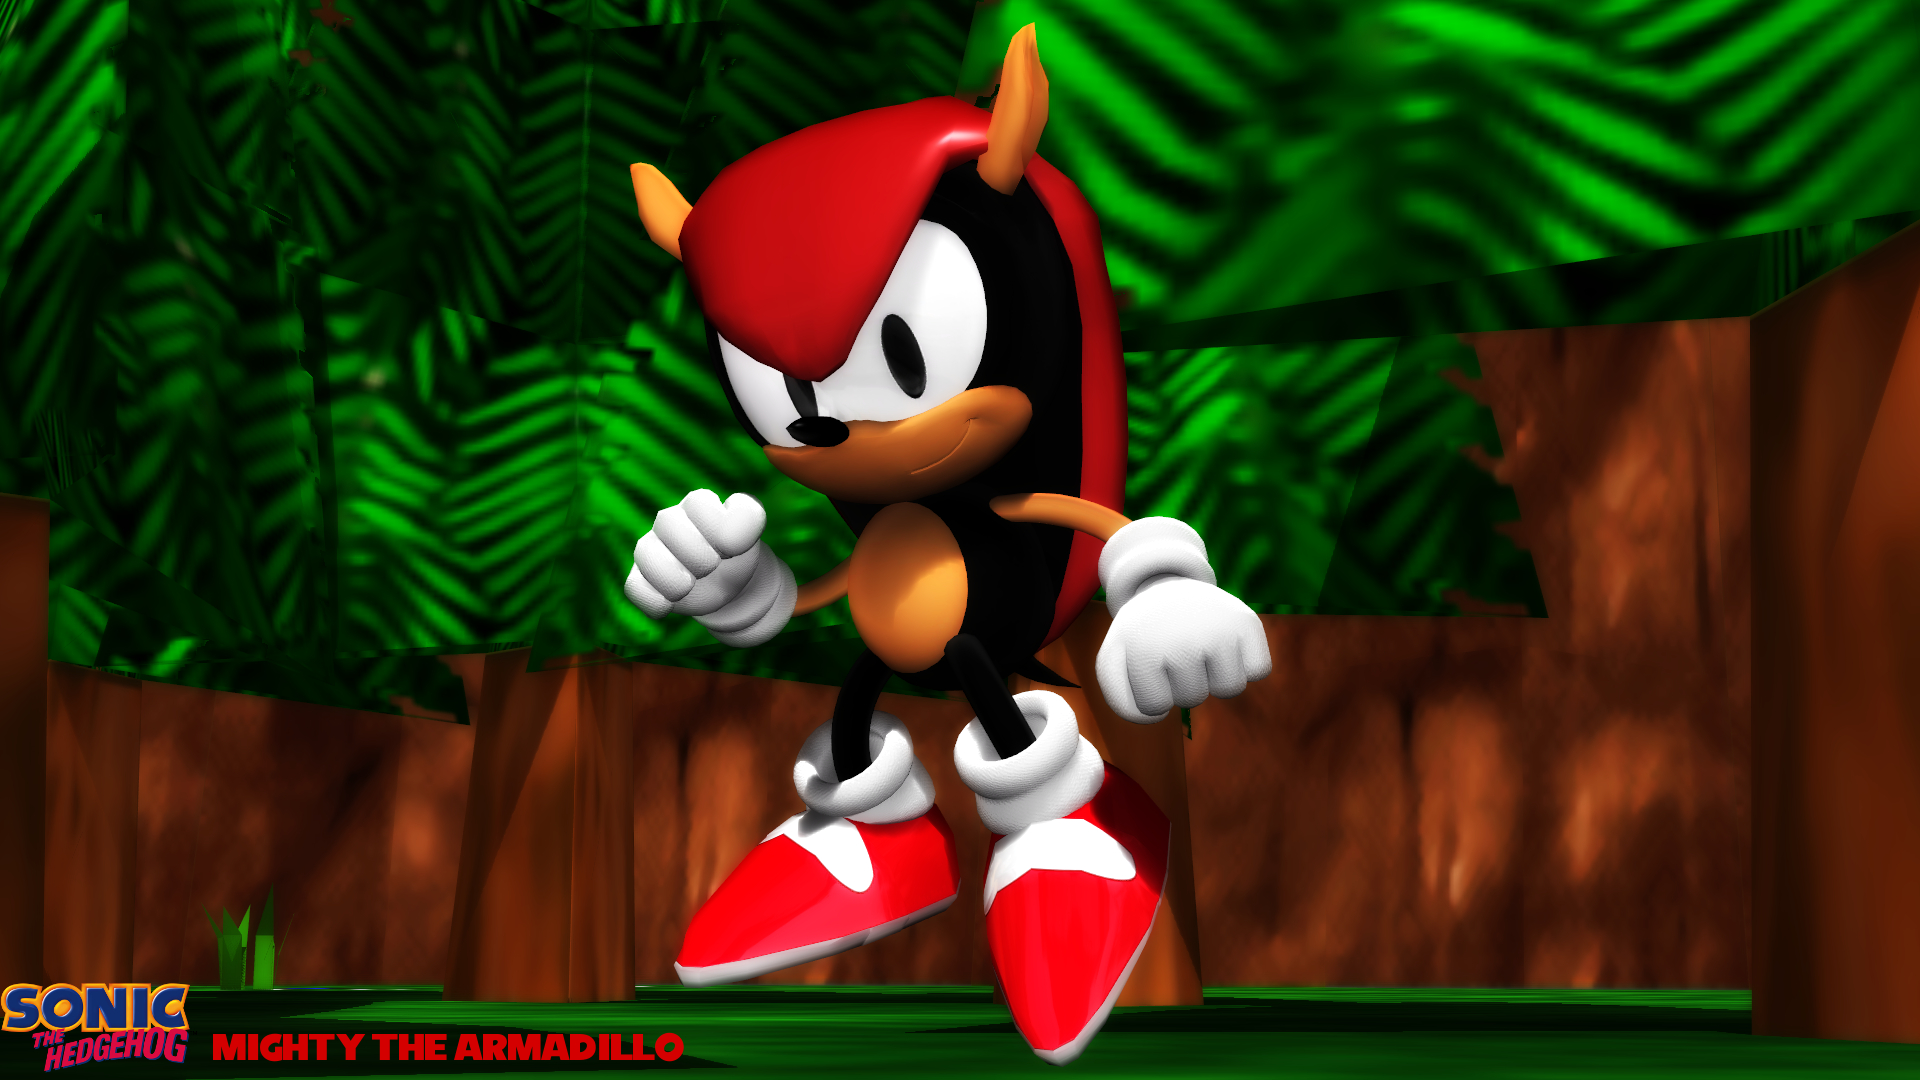 Mmd Fbx Model Mighty The Armadillo Download By Sab64 On Deviantart